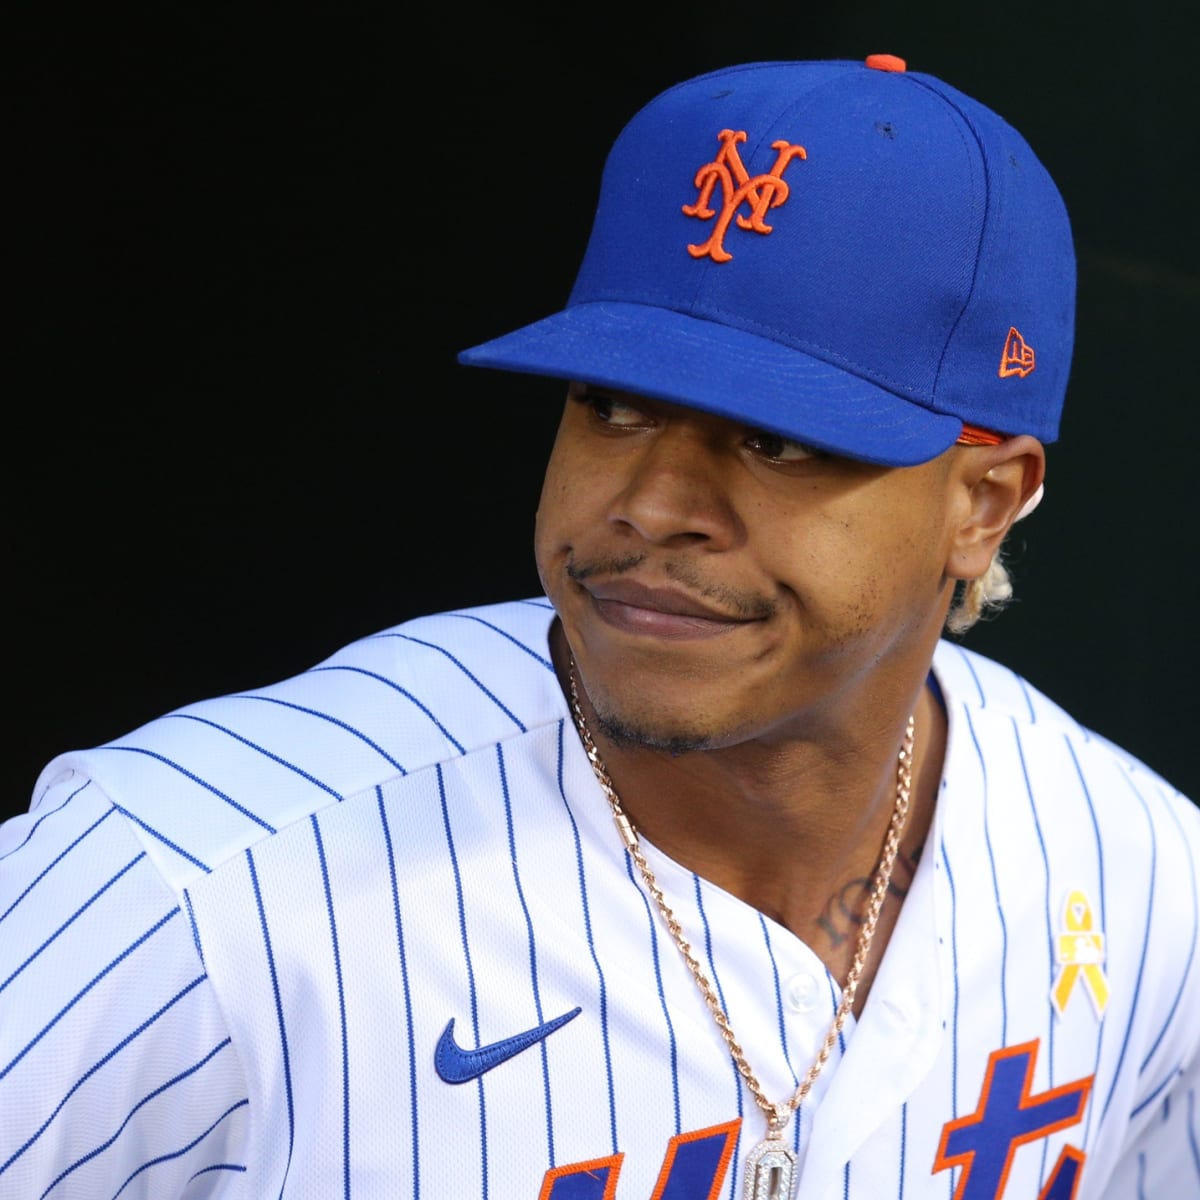 Mets: Three takeaways from Marcus Stroman's first start of 2021